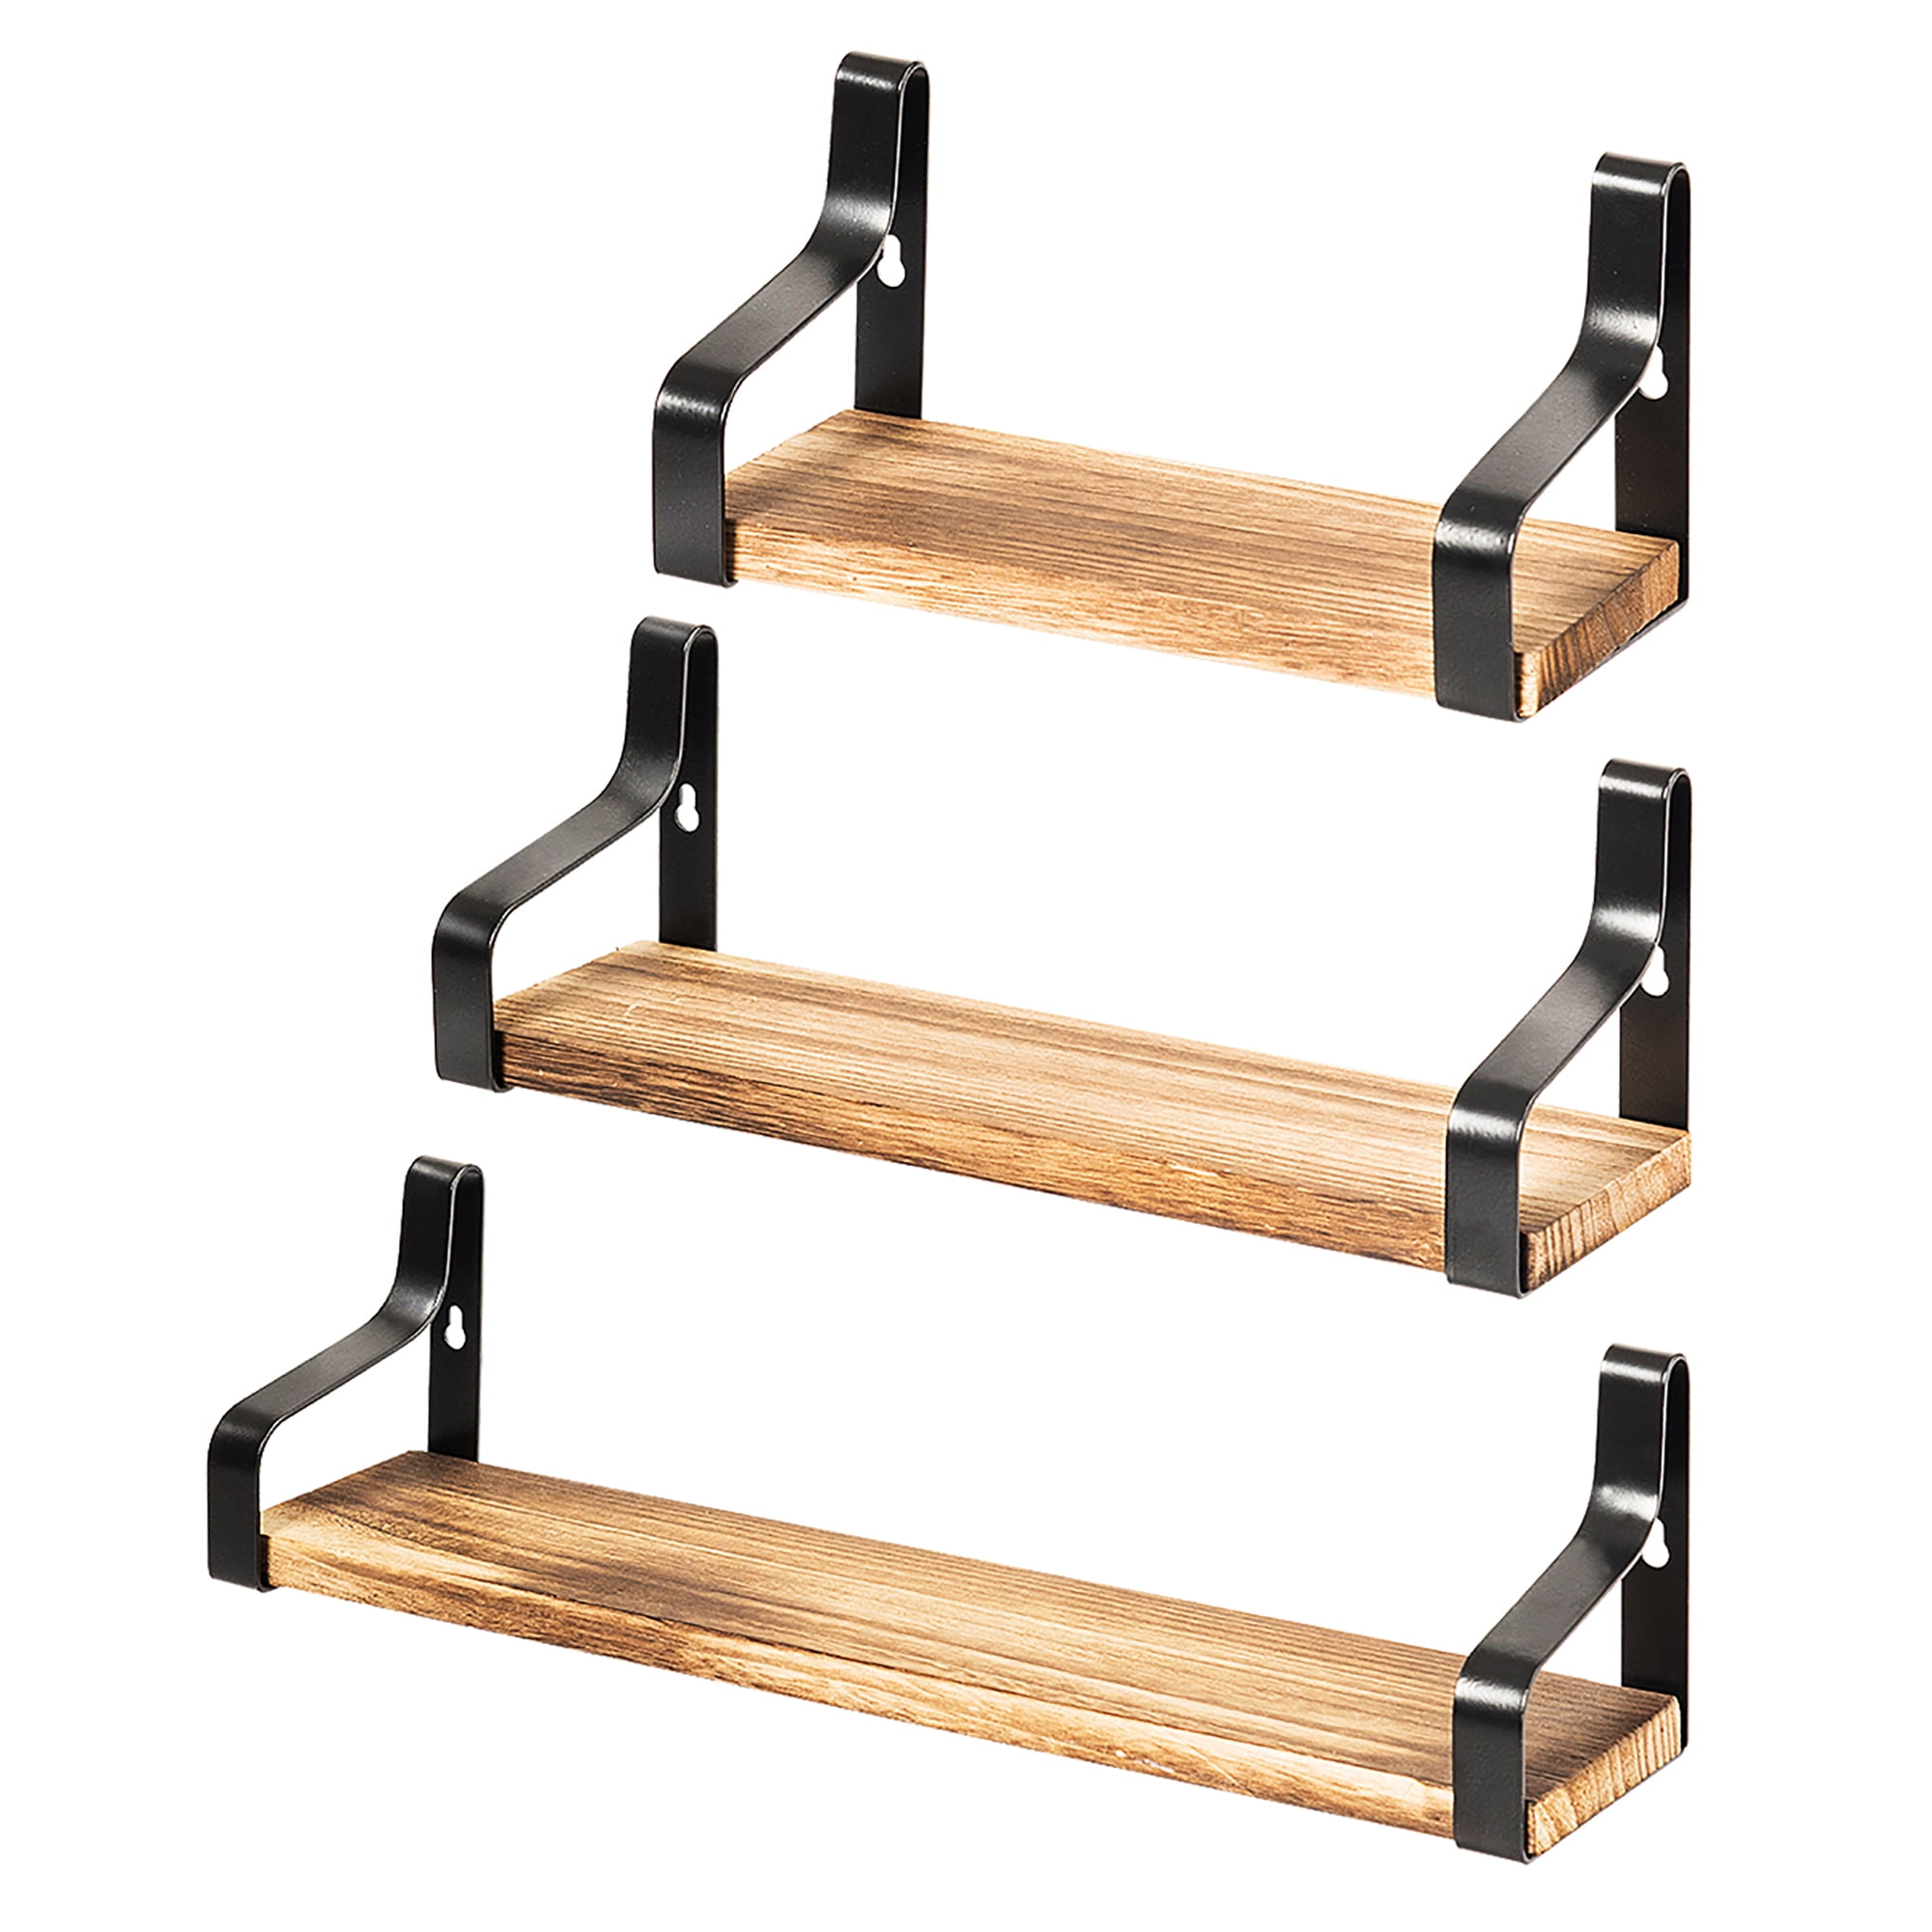 Costway Floating Shelves Wall Mounted, Wooden Wall Mounted Shelves